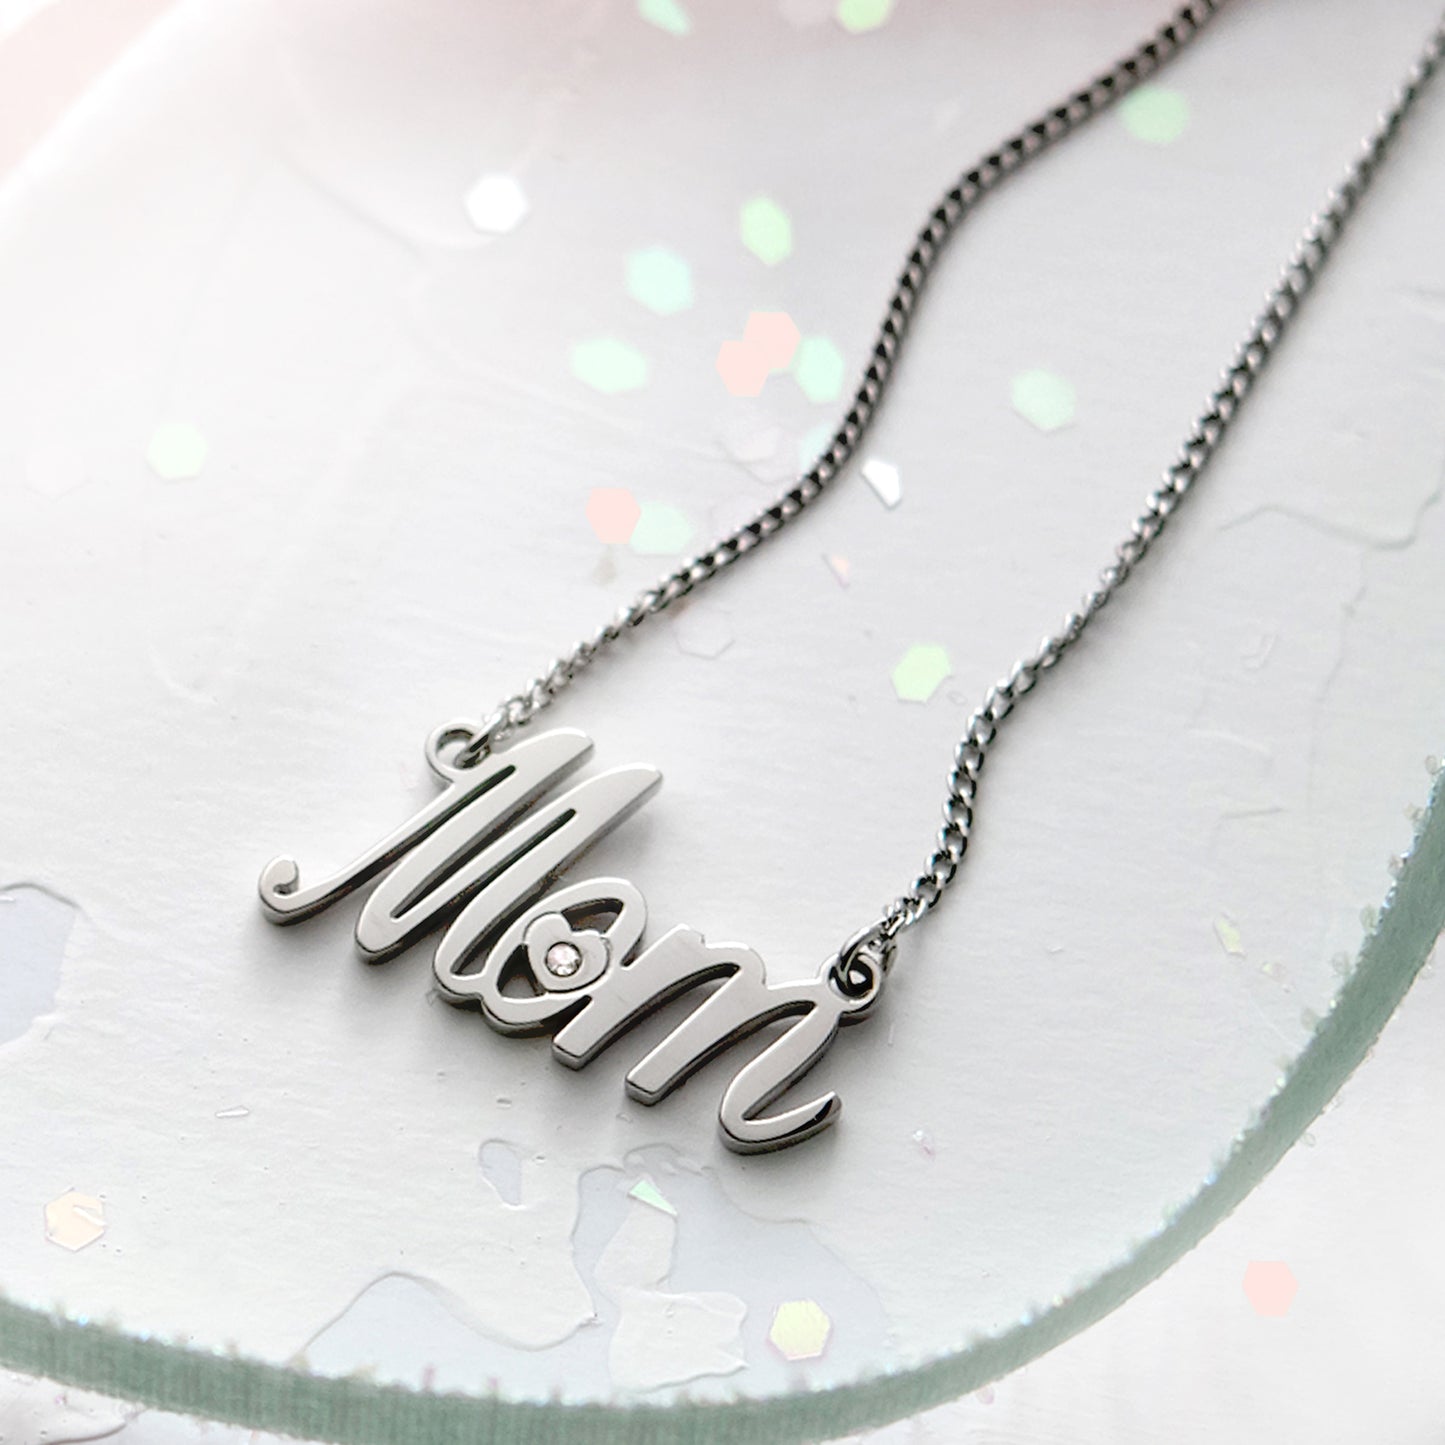 "Mom" Script Pendant Necklace with Cubic Zirconia Heart Stainless Steel Jewelry